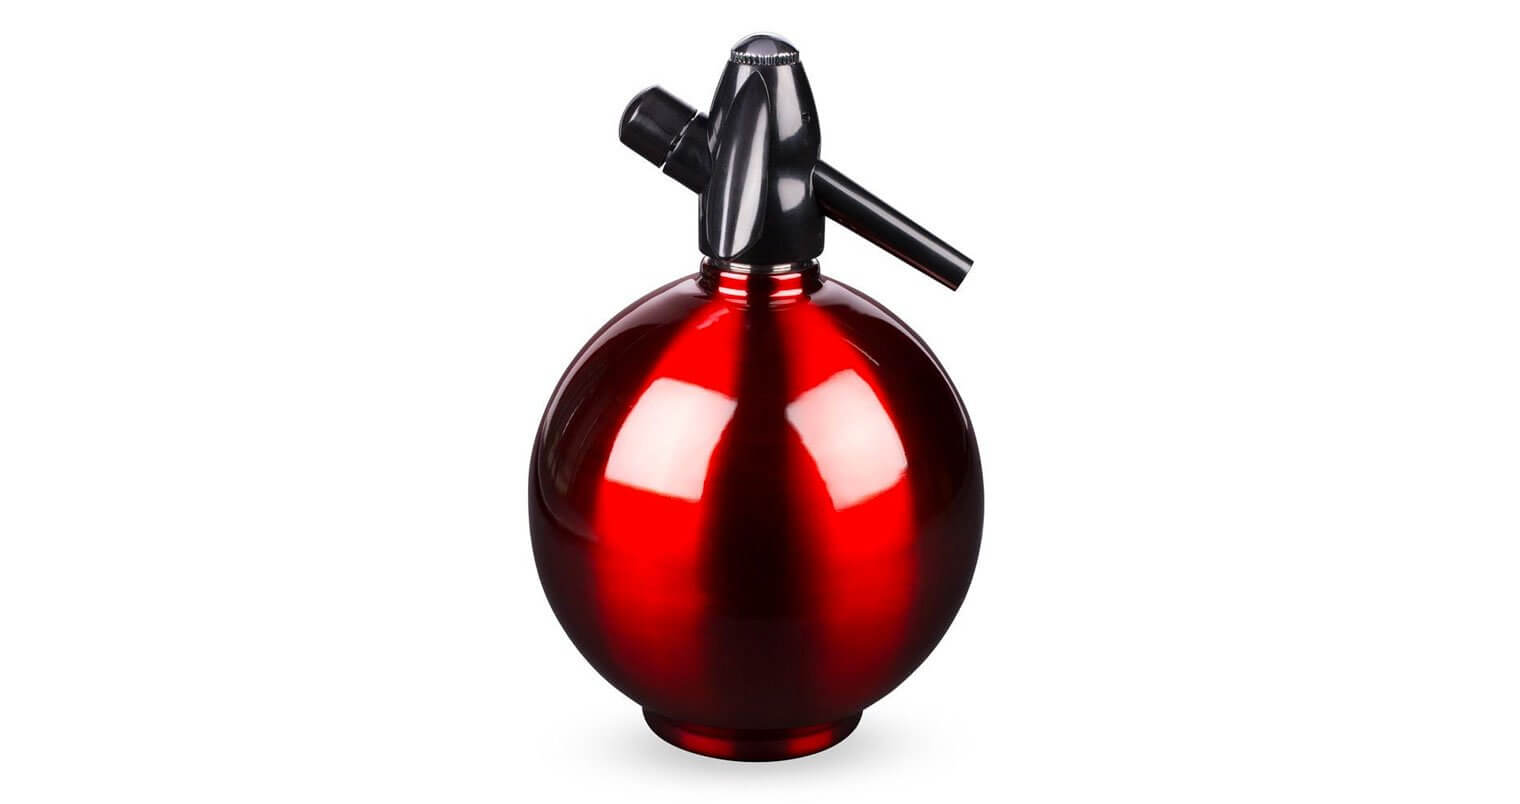 Campari Red Retro Stainless Steel Soda Siphon, featured image